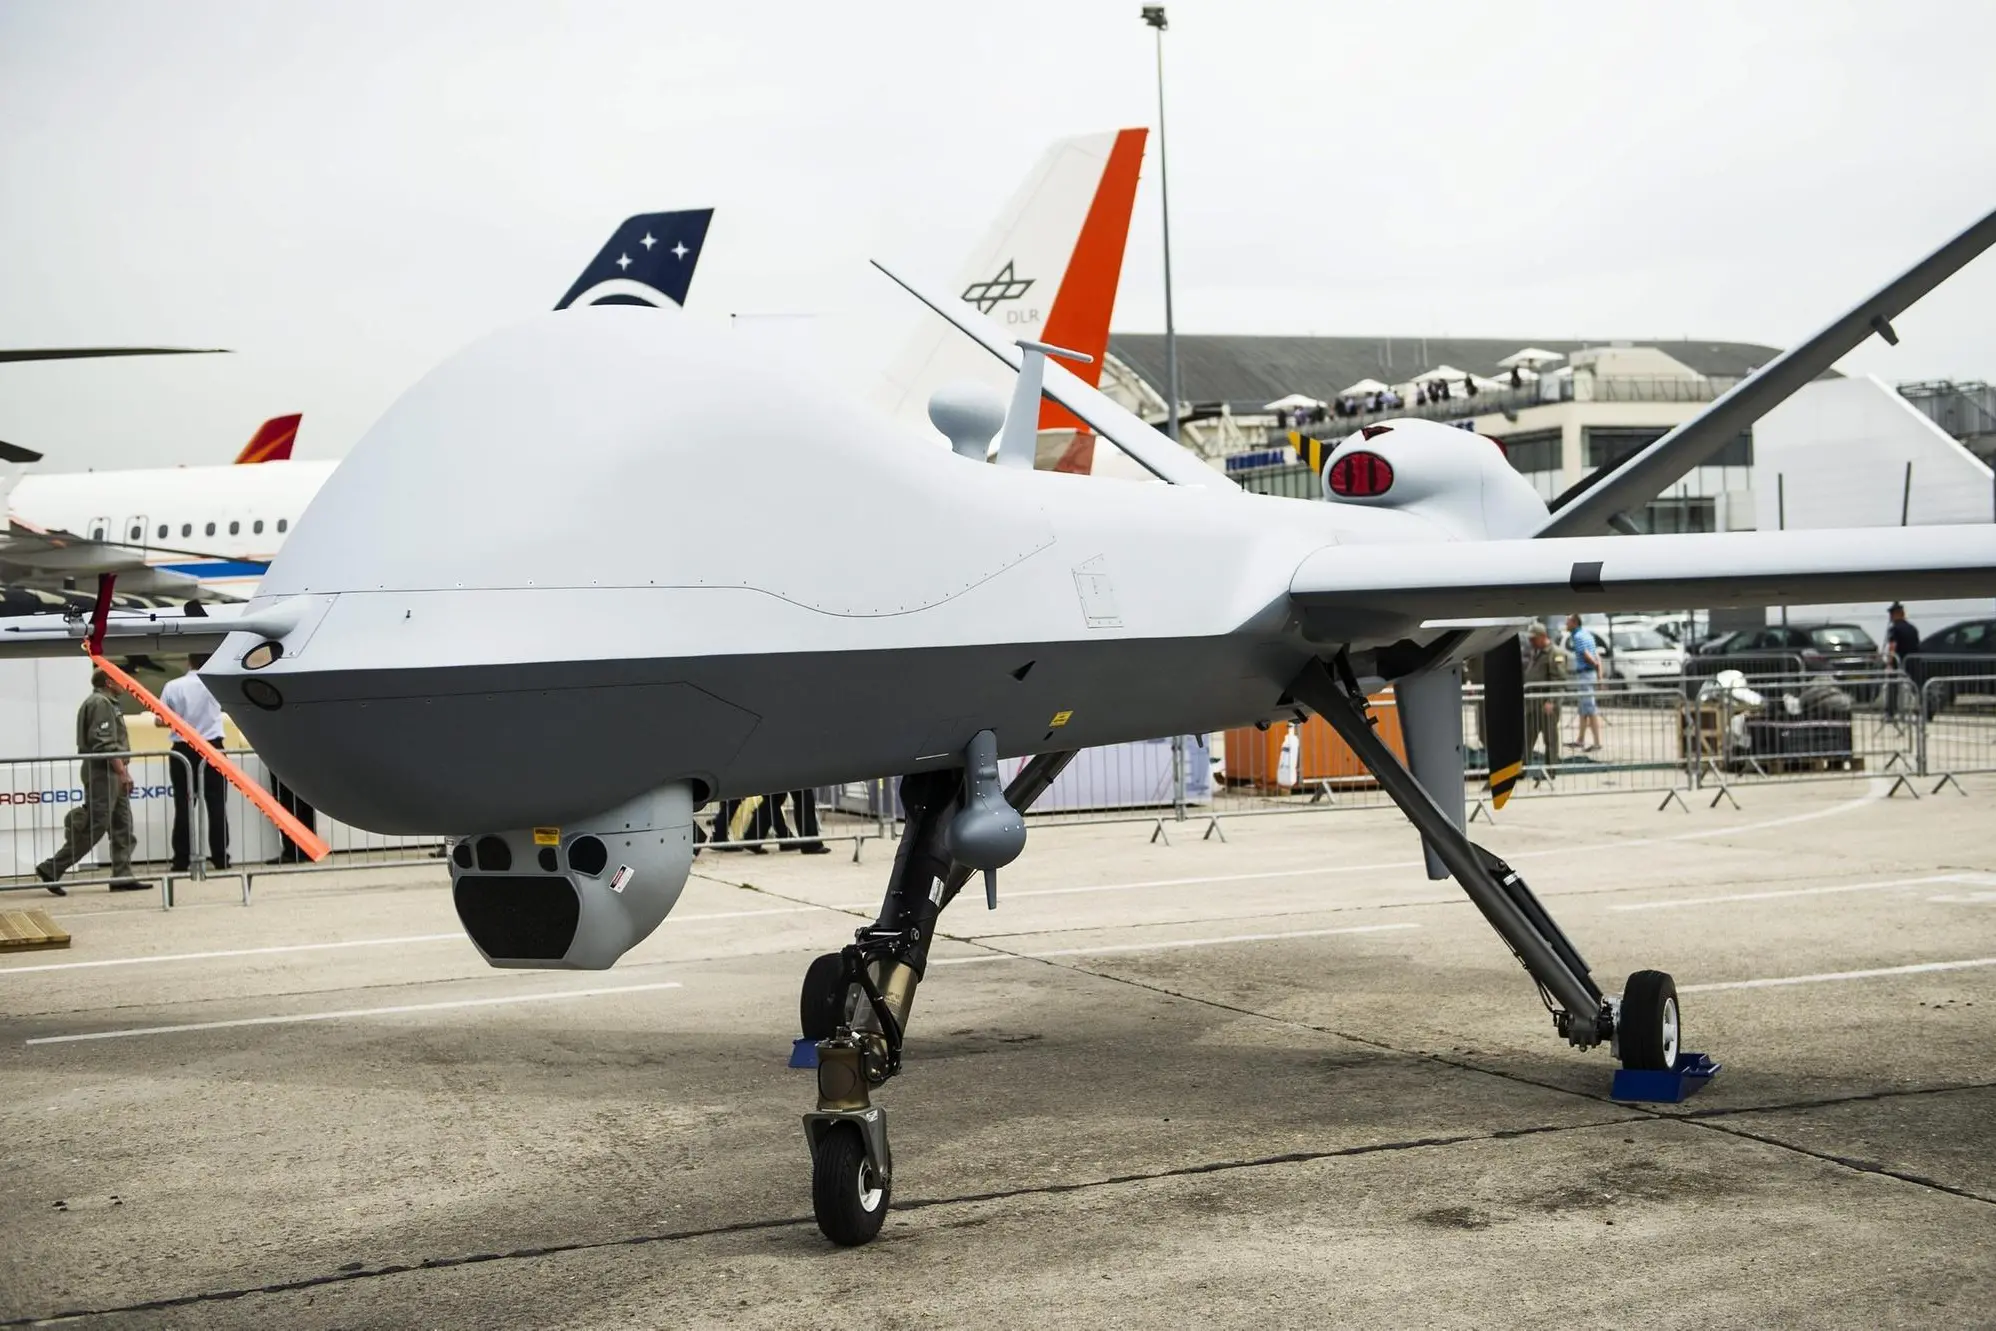 An American Drone Reaper is displayed during the Air Show 2013 at Le Bourget, France, 18 June 2013. ANSA/ETIENNE LAURENT